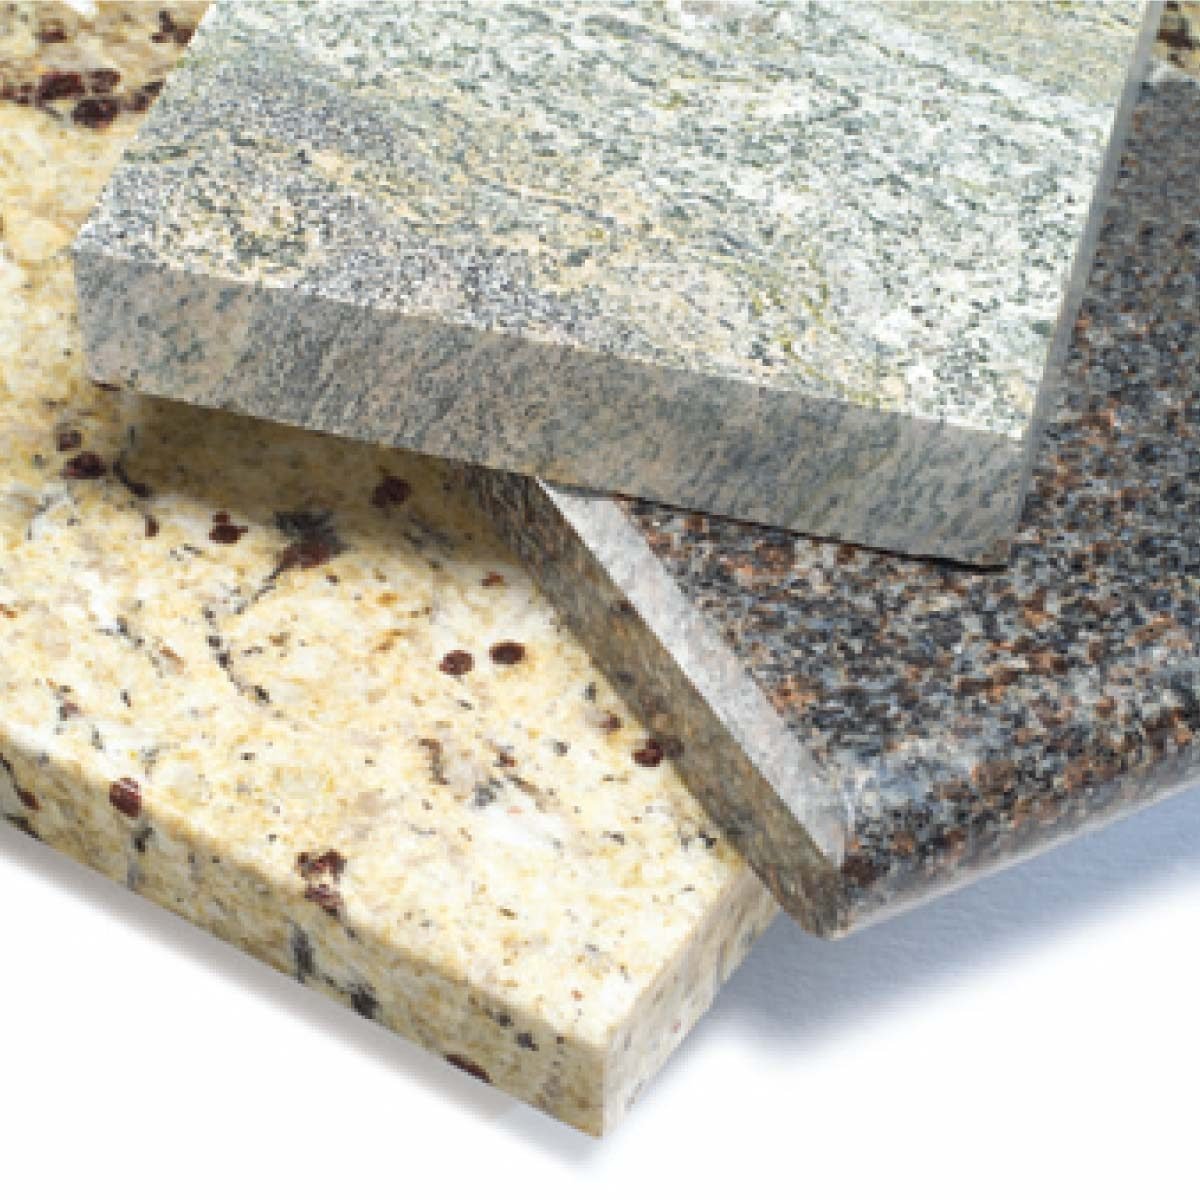 Buying Countertops Plastic Laminates Granite And Solid Surfaces,Passion Flower Vine Care